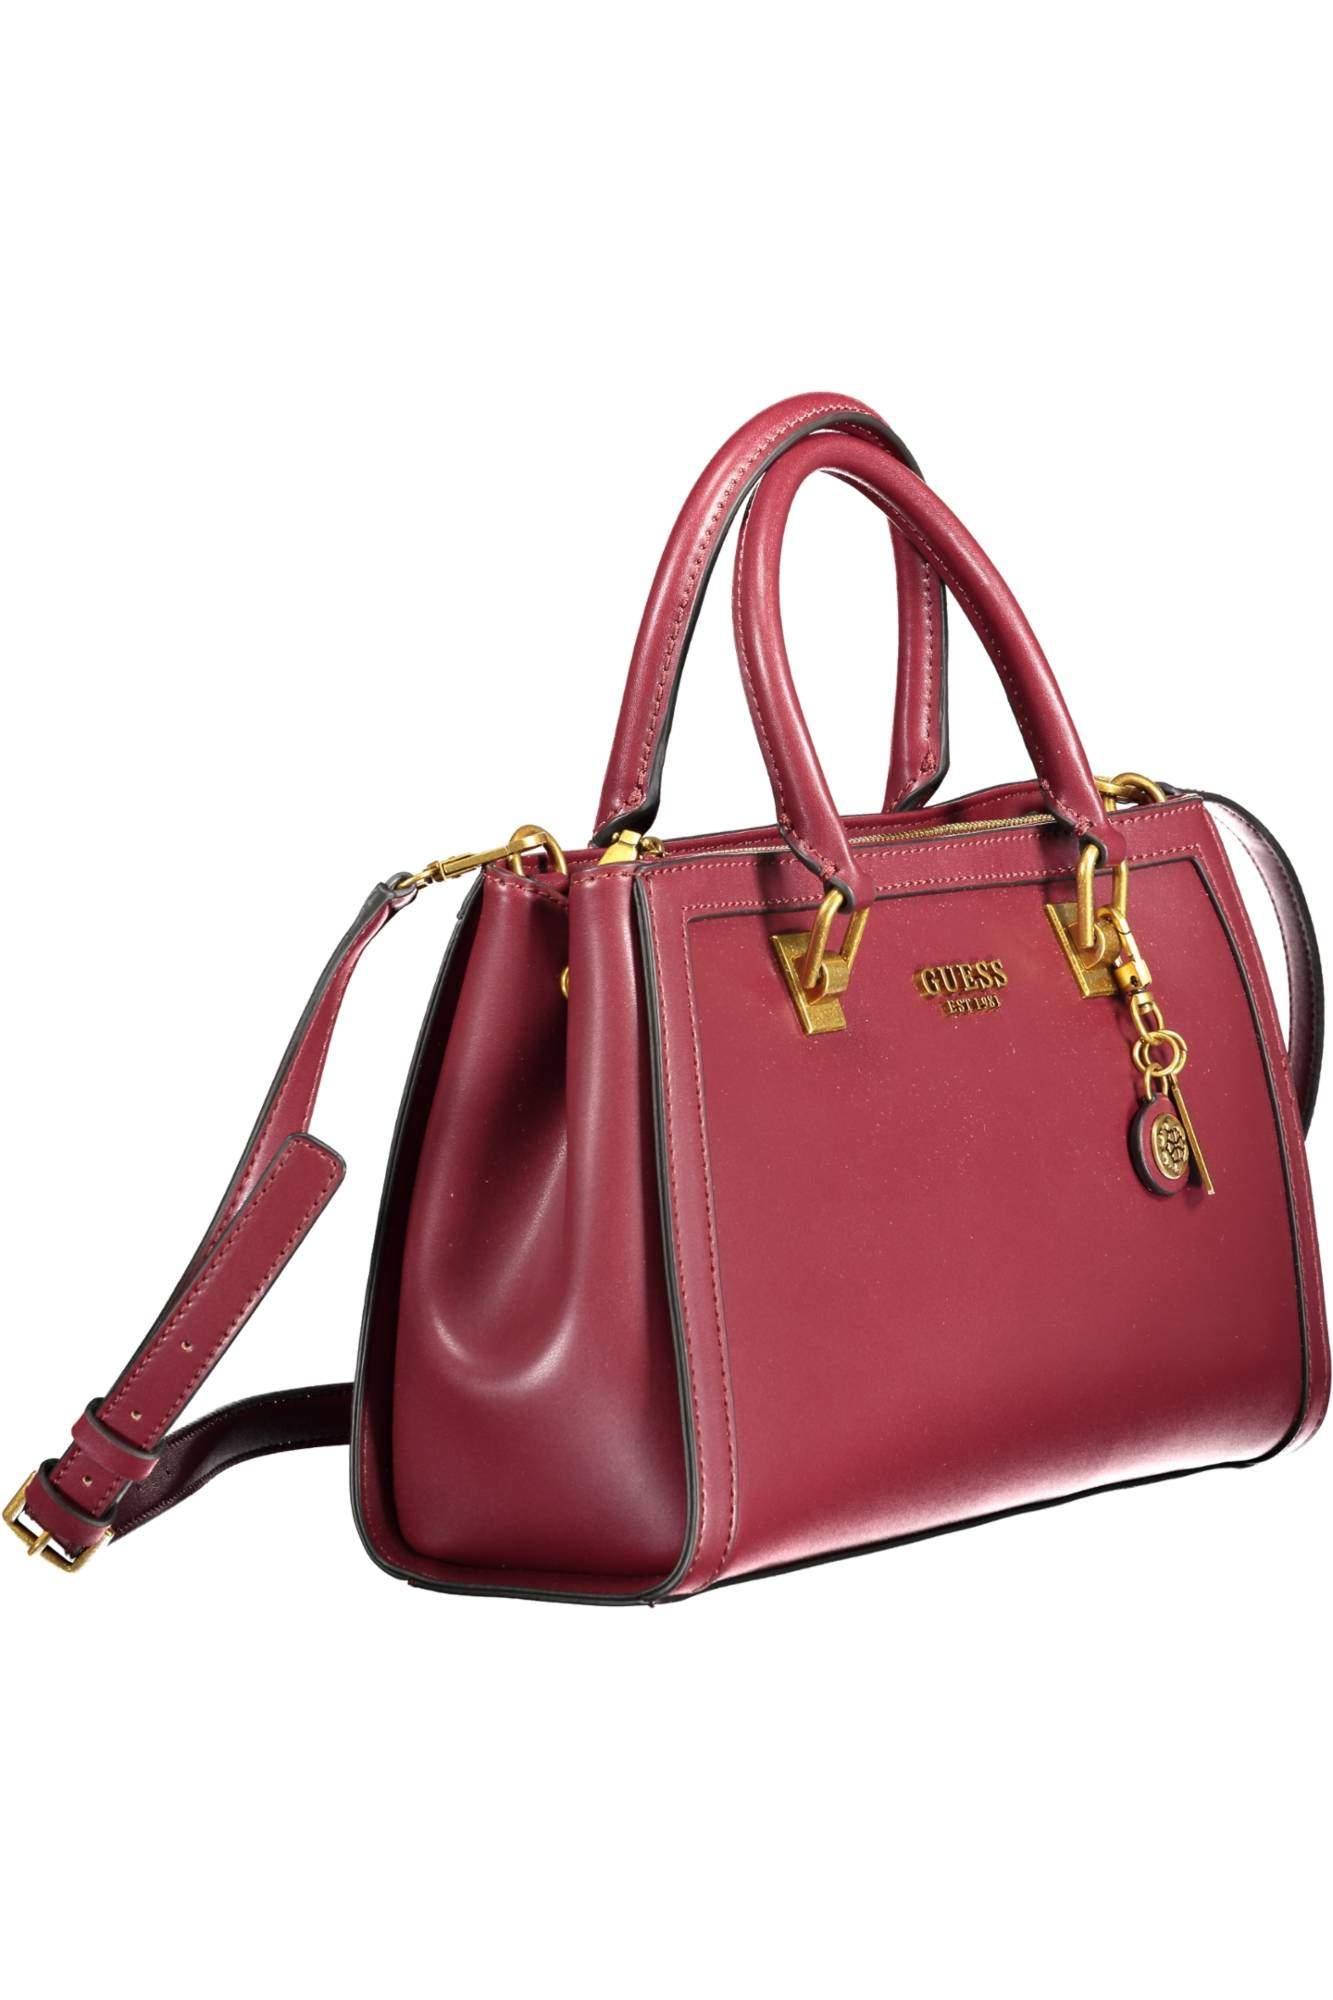 Guess Tote In Red Leather